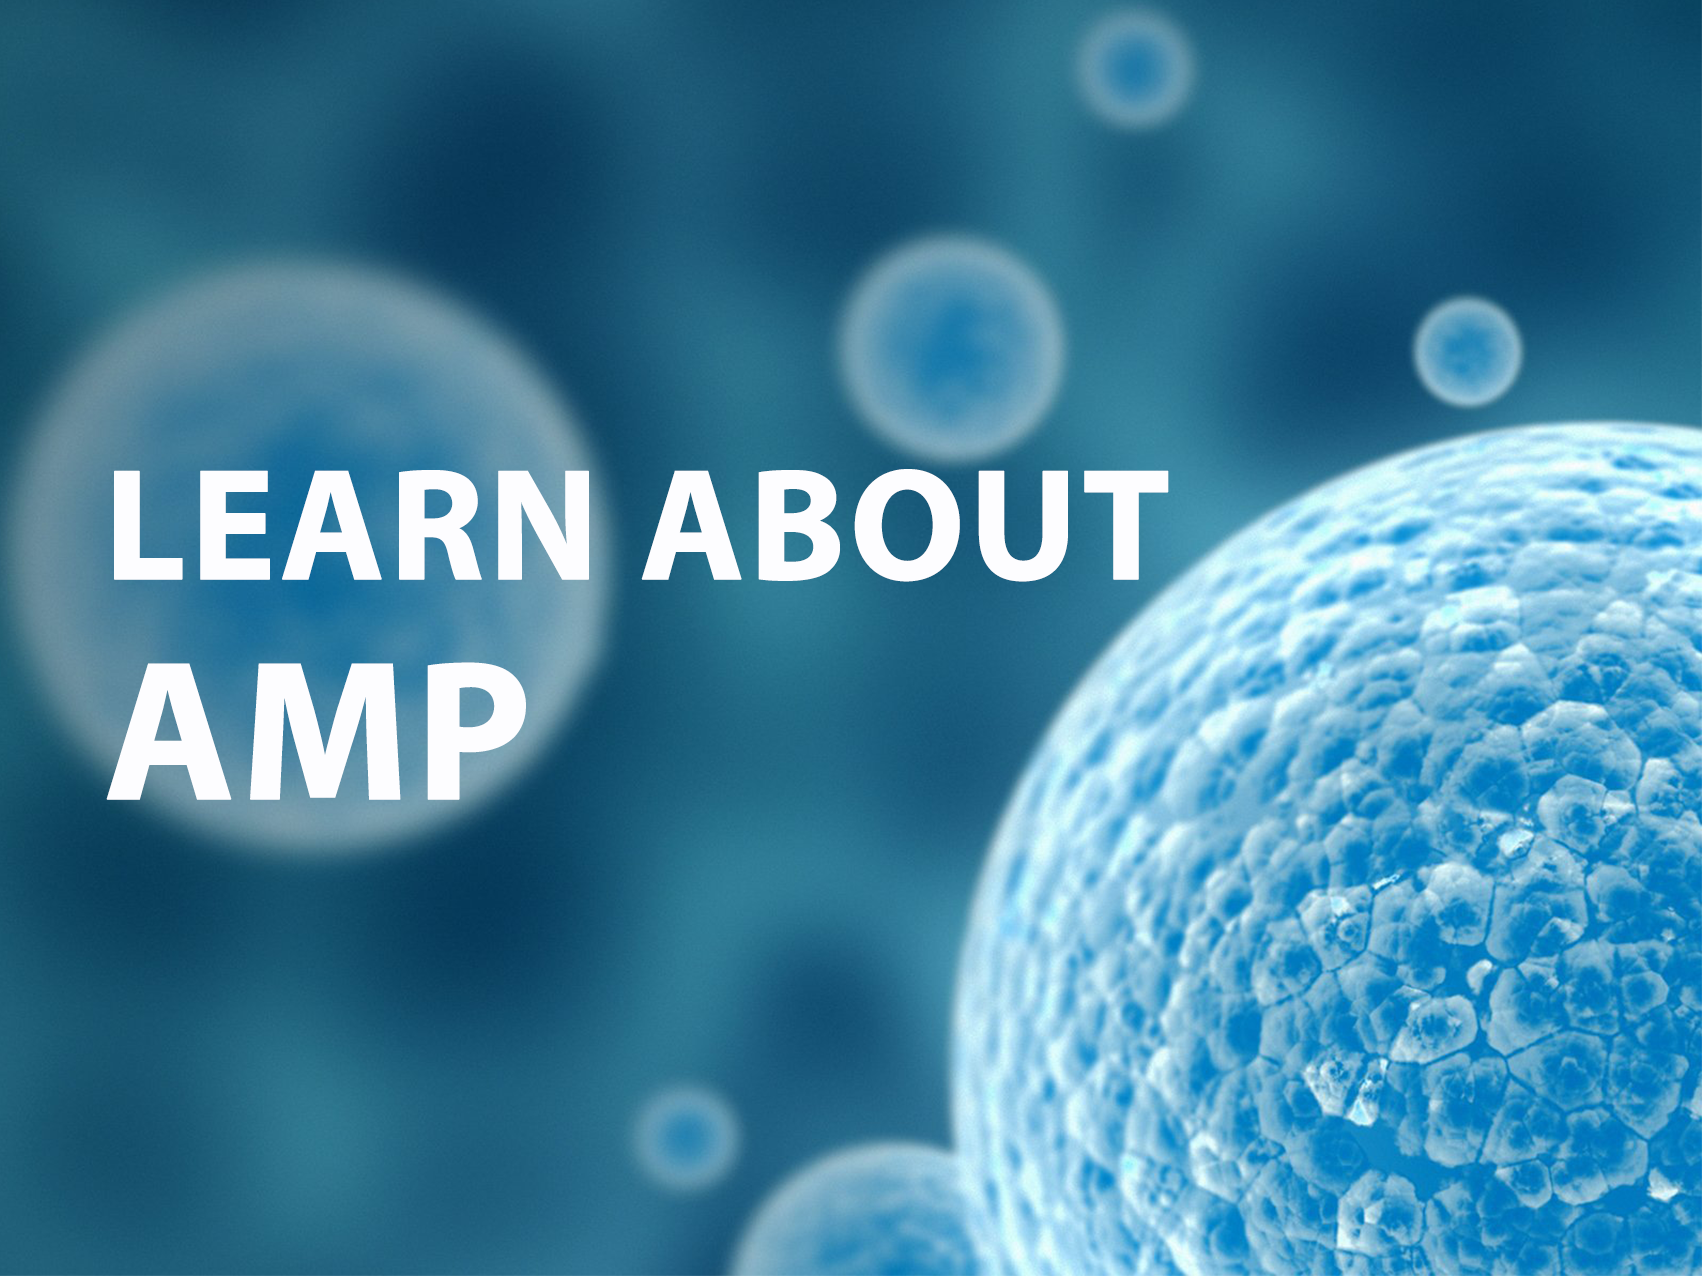 Learn about Antimicrobial Peptides (AMPs)